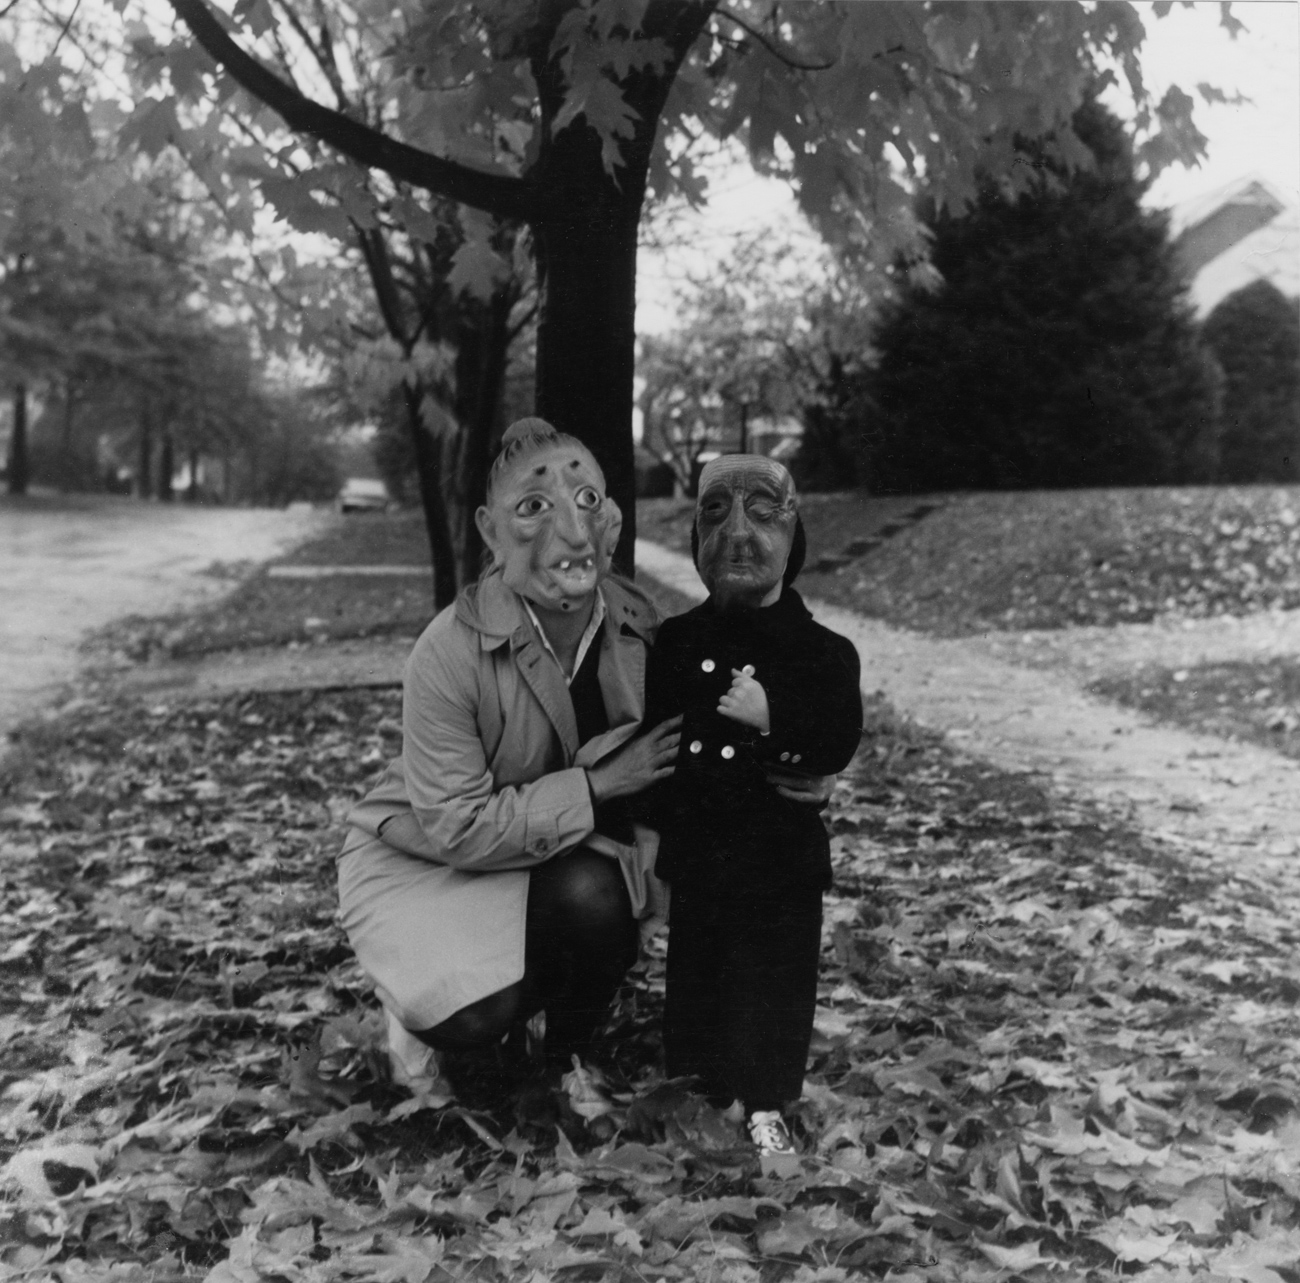 Black and white photograph of two masked figures on a leaf-covered front lawn front lawn